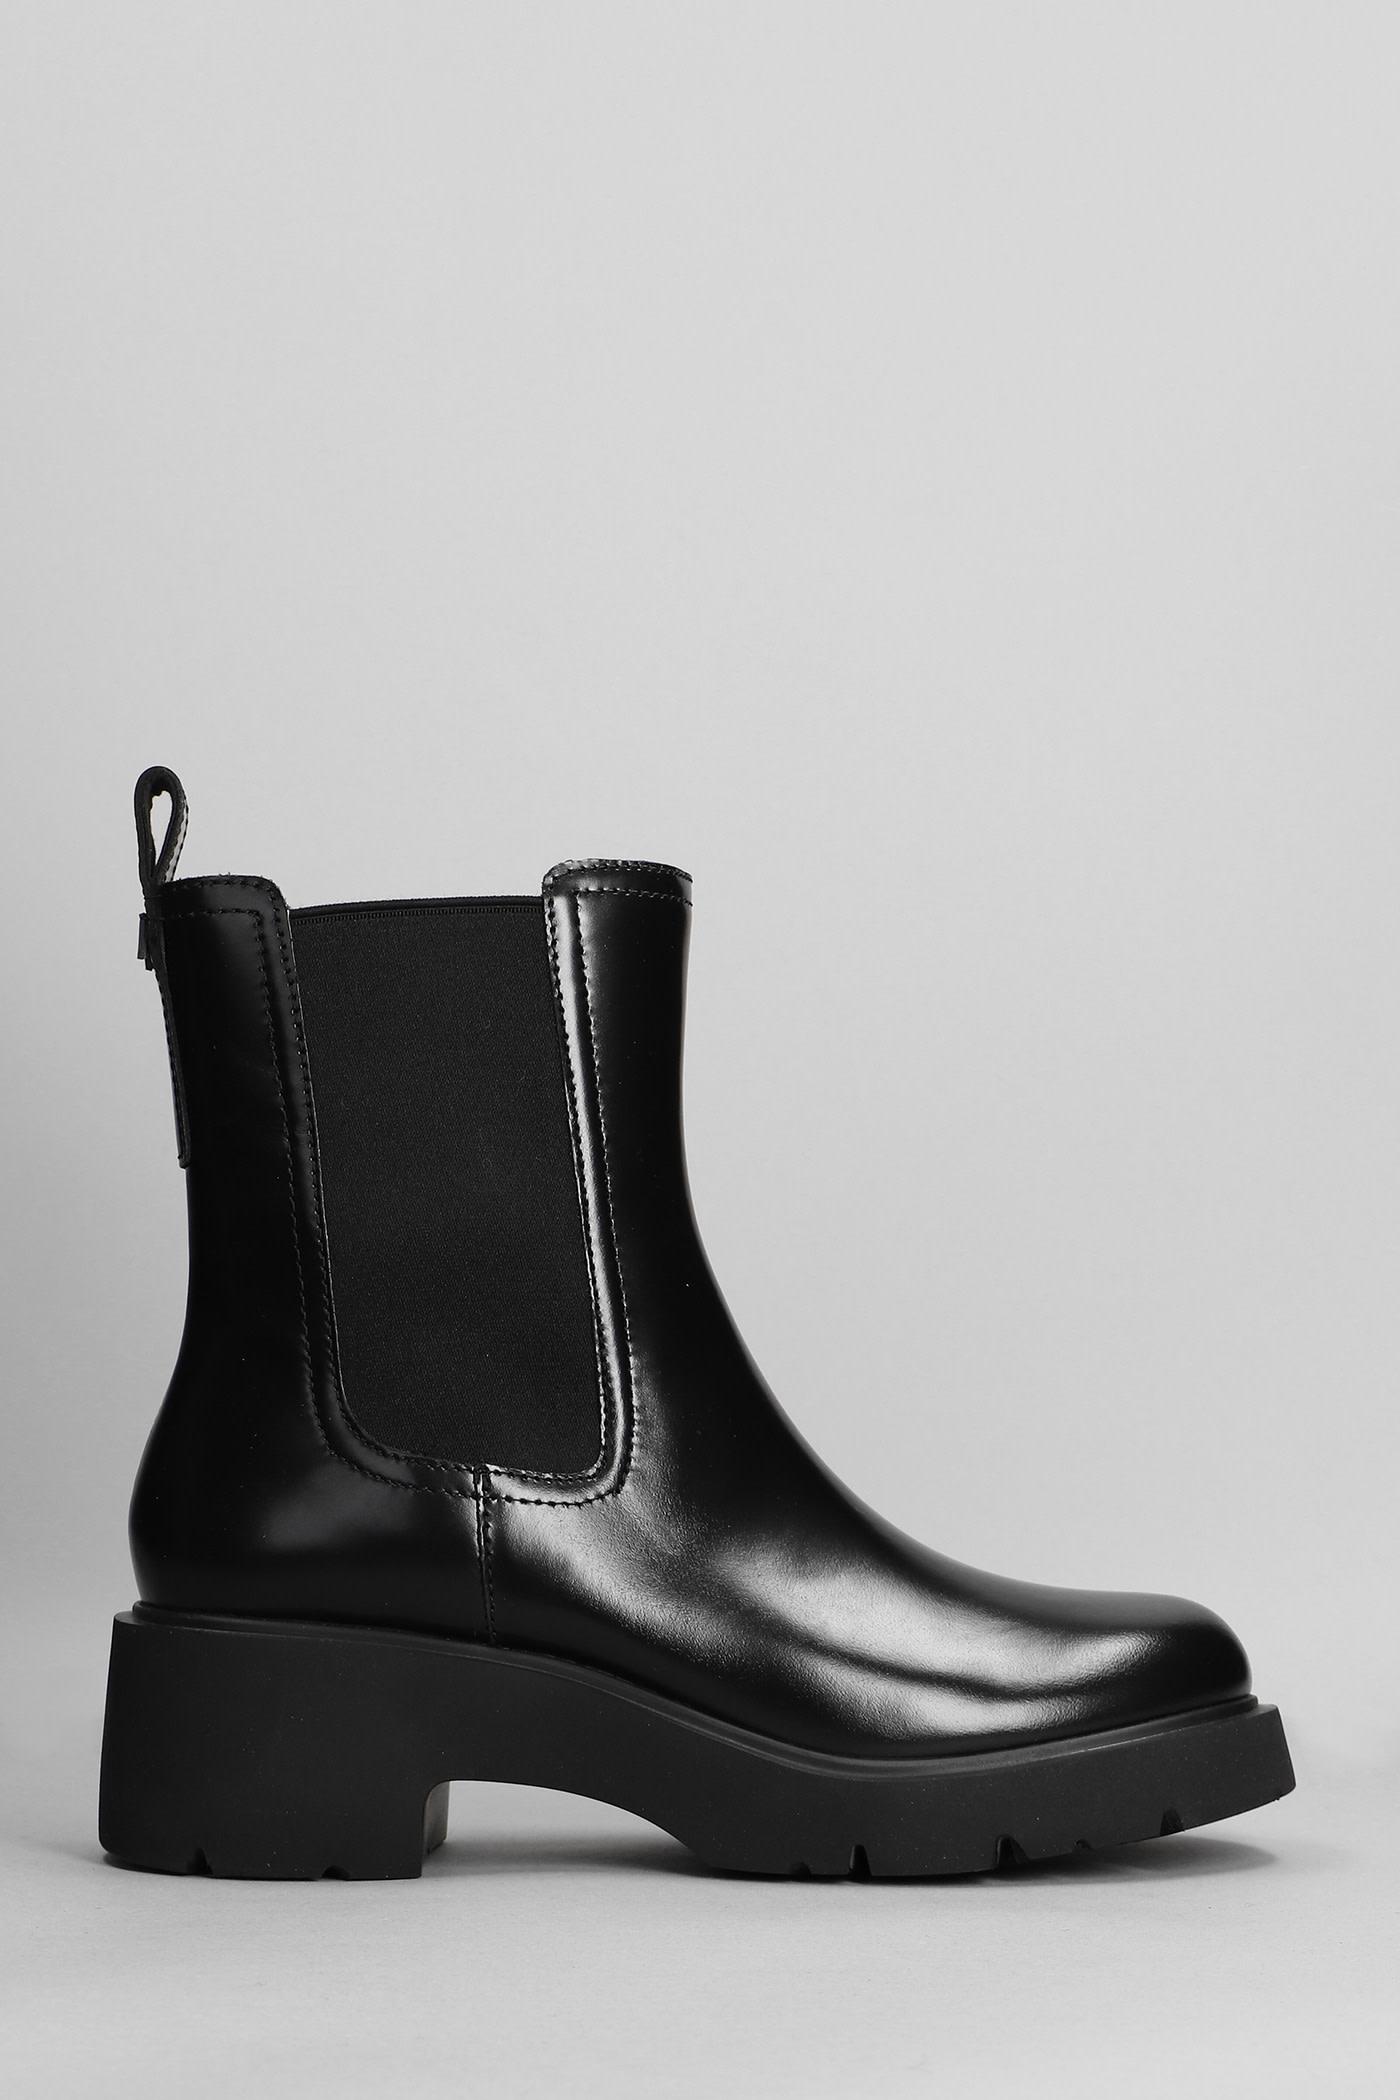 Camper Milah Combat Boots In Black Leather | Lyst